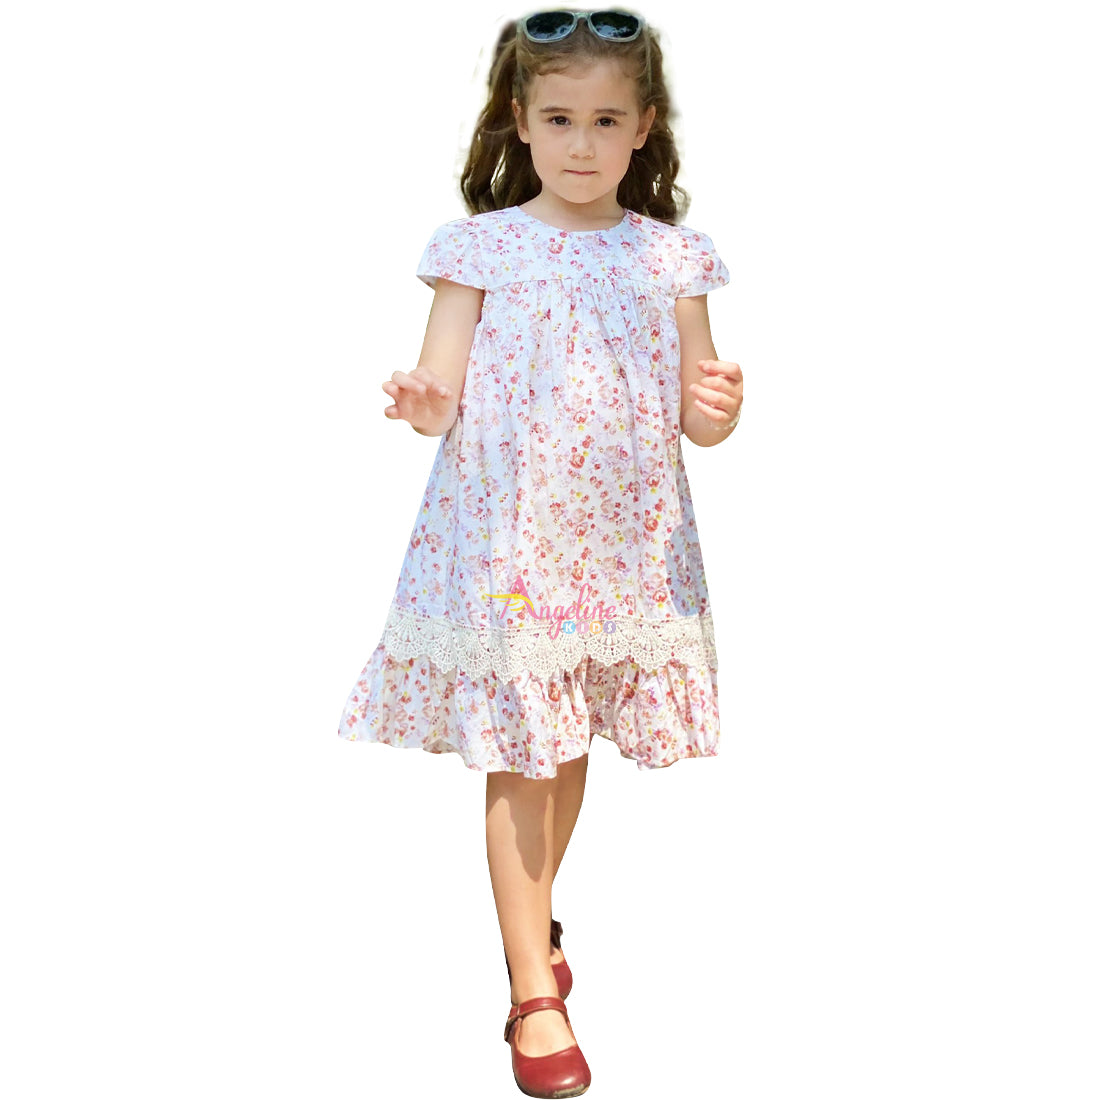 Baby Little Girls Classic Vintage Roses Lace Dress - Ivory Rose - Angeline Kids